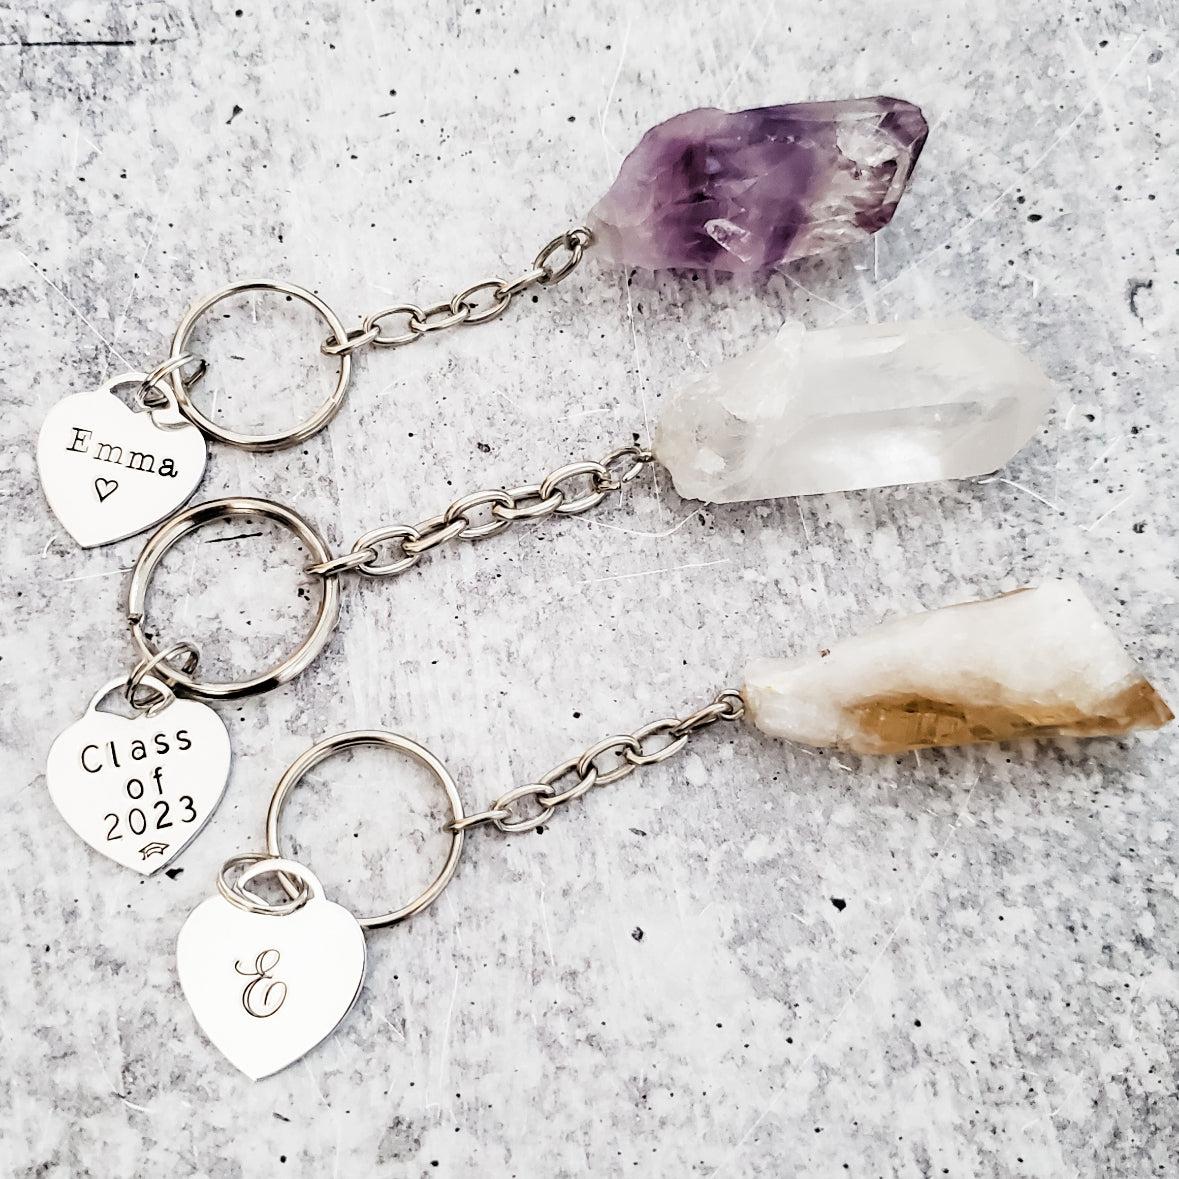 Class of 2023 Personalized Crystal Keychain Salt and Sparkle